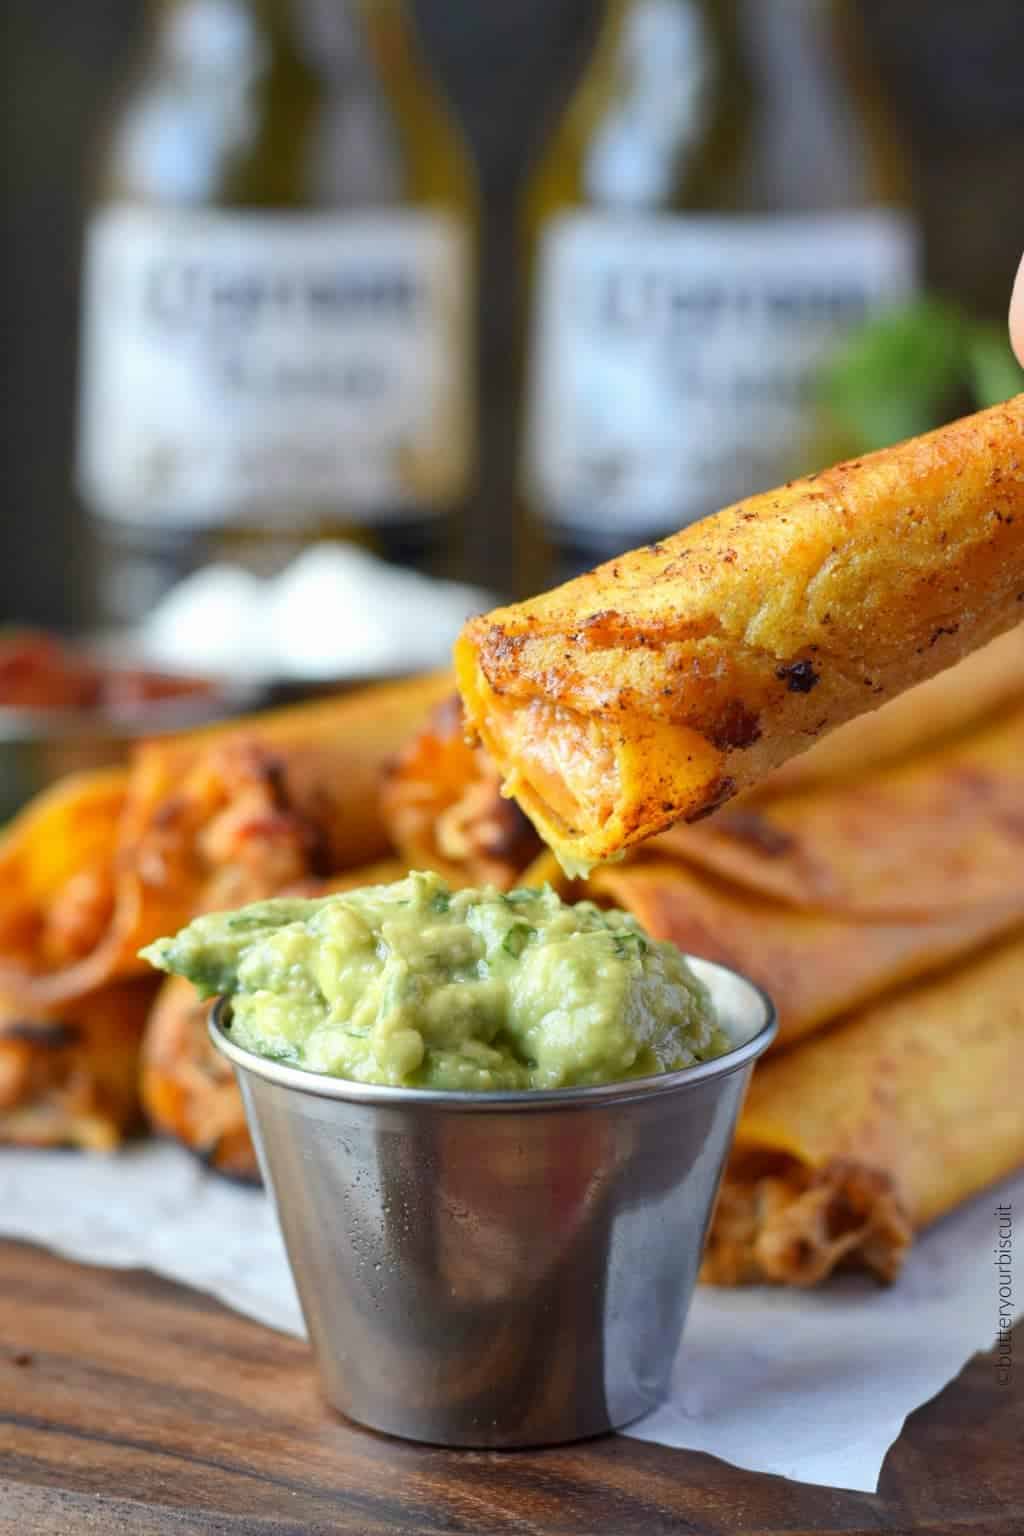 A taquito is dipped in guacamole.